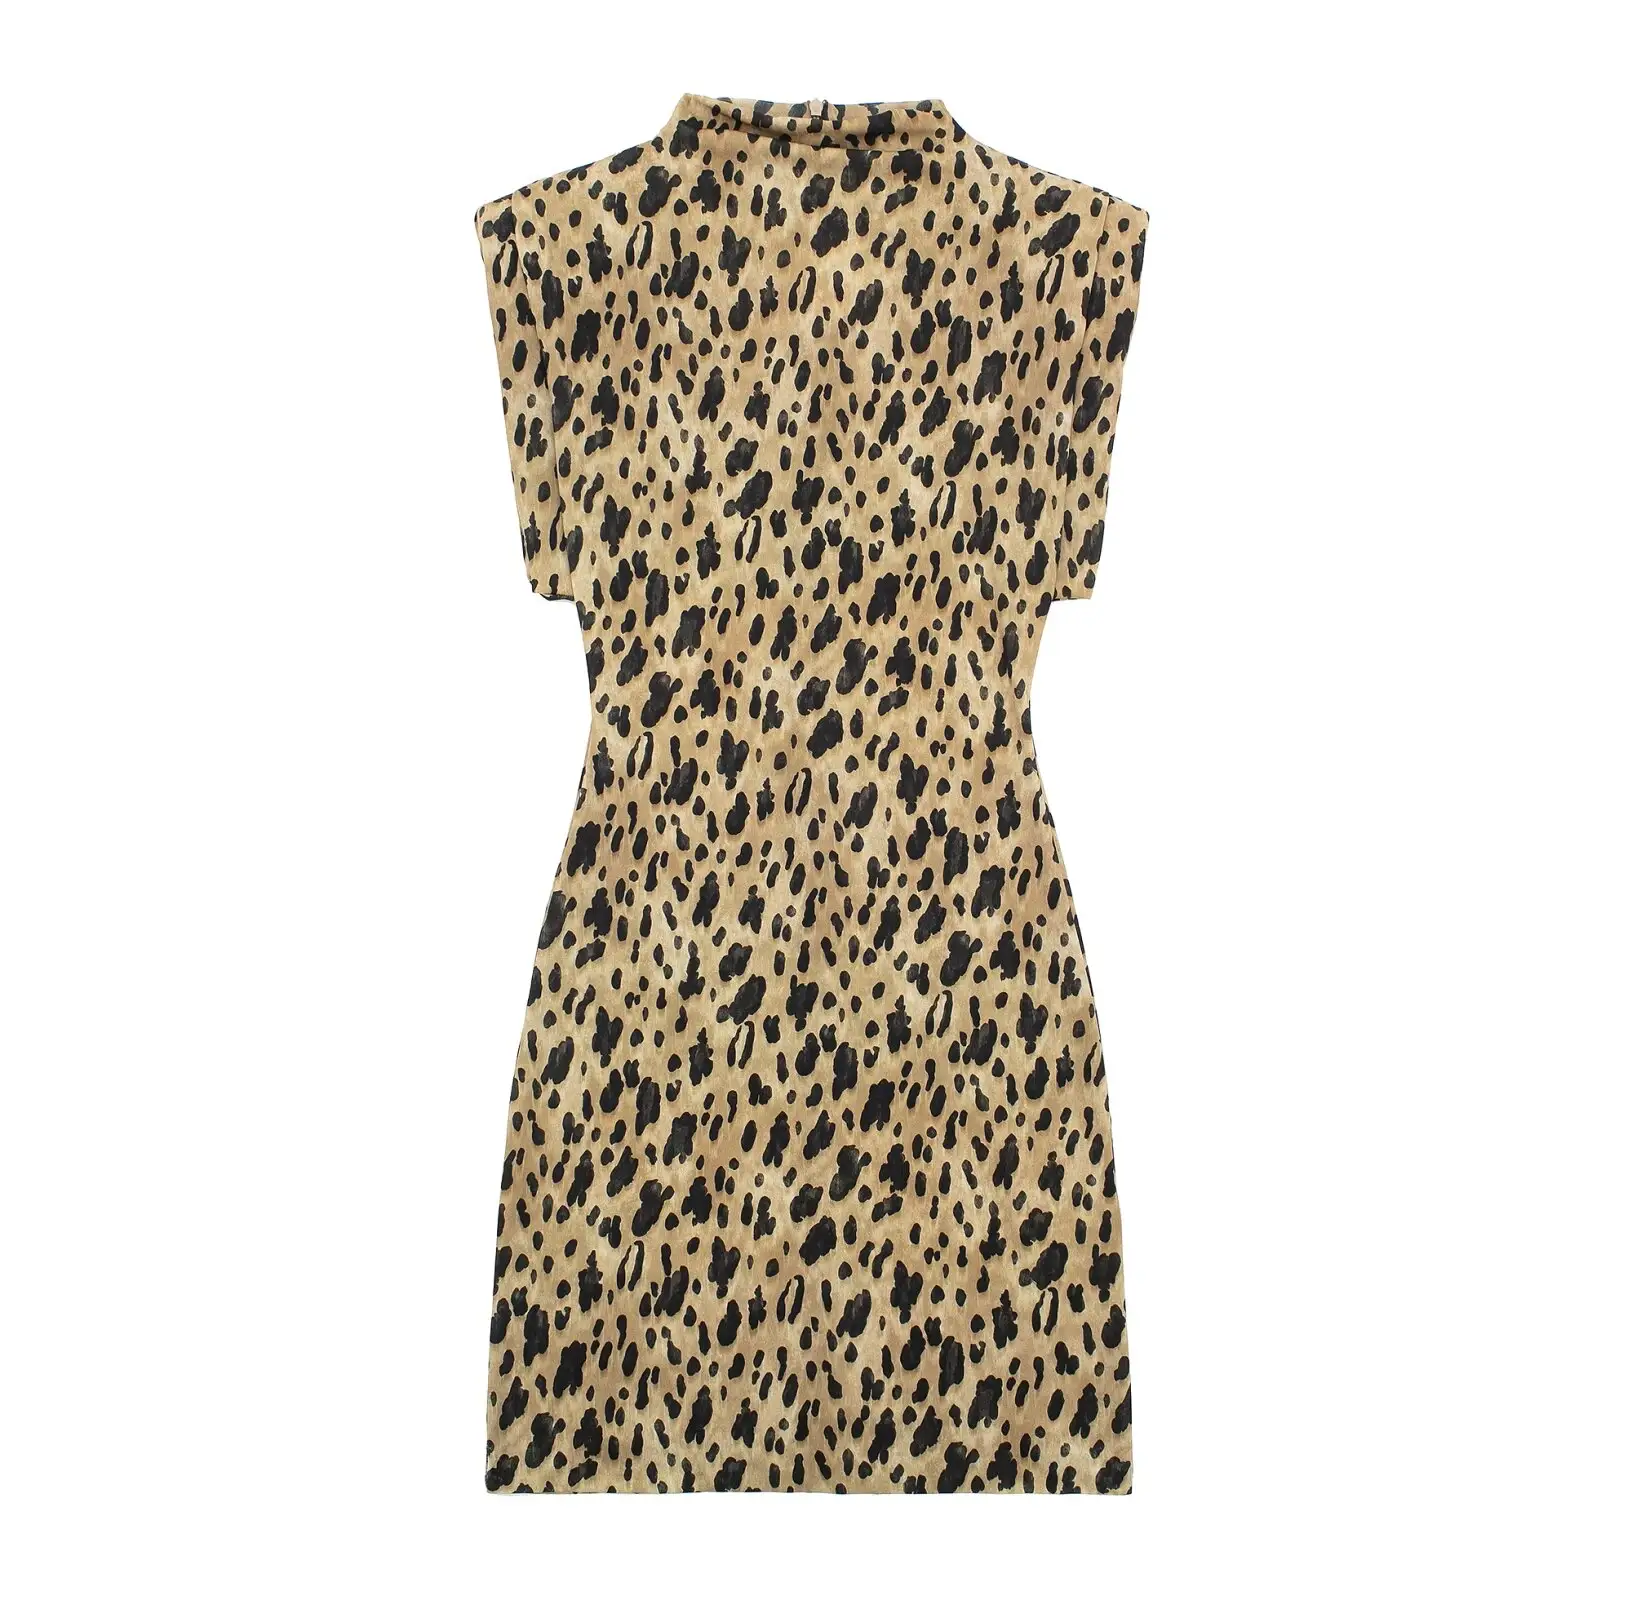 Women summer new fashion collection animal print dress retro casual chic sexy dress